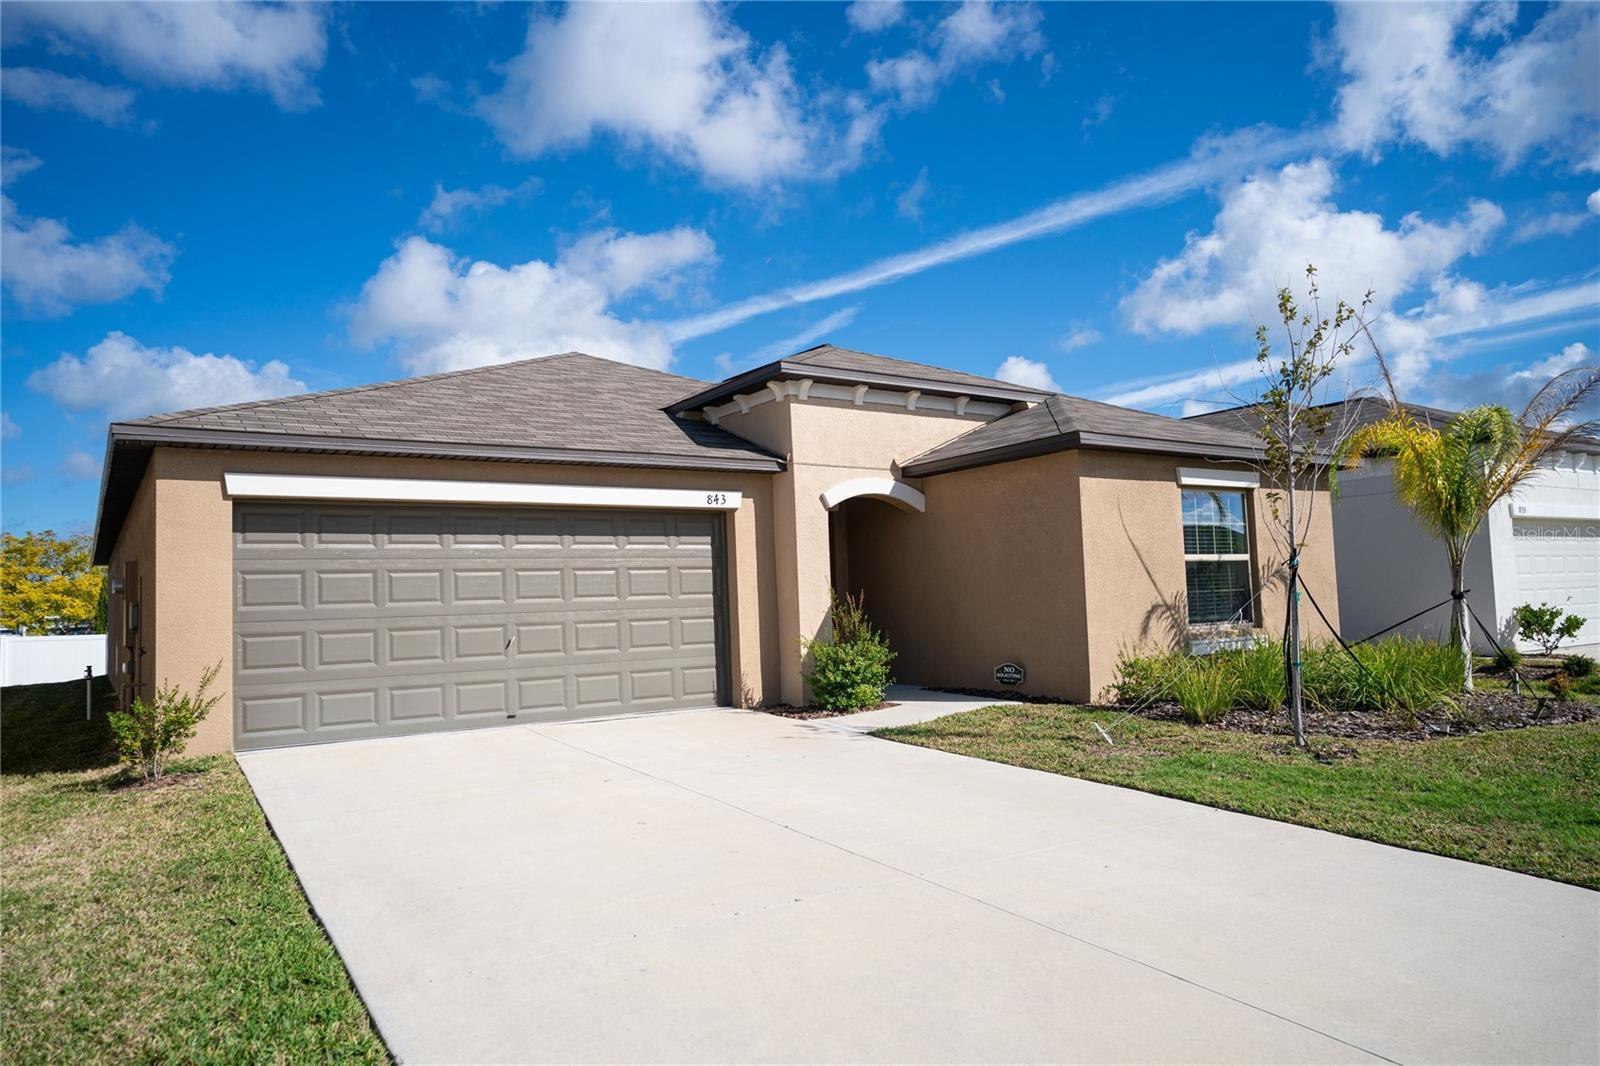 Photo one of 843 Anchor Bend Dr Ruskin FL 33570 | MLS U8222173